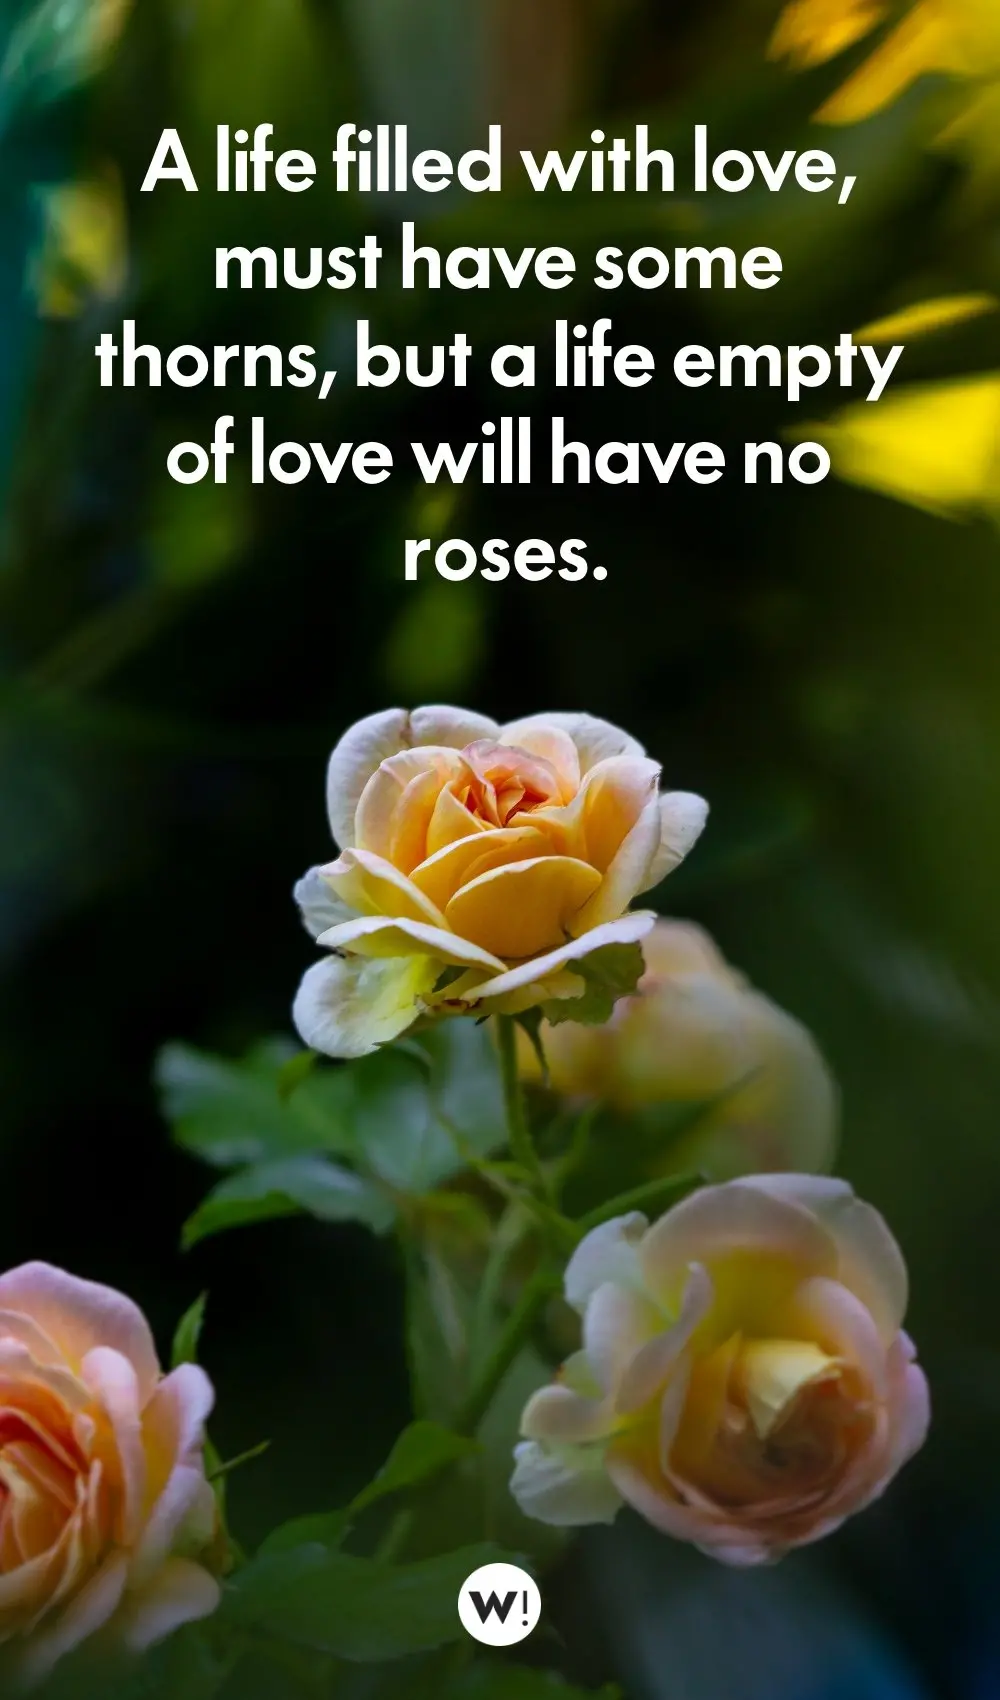 Quotes About Roses In Life A Life Filled With Love, Must Have Some Thorns